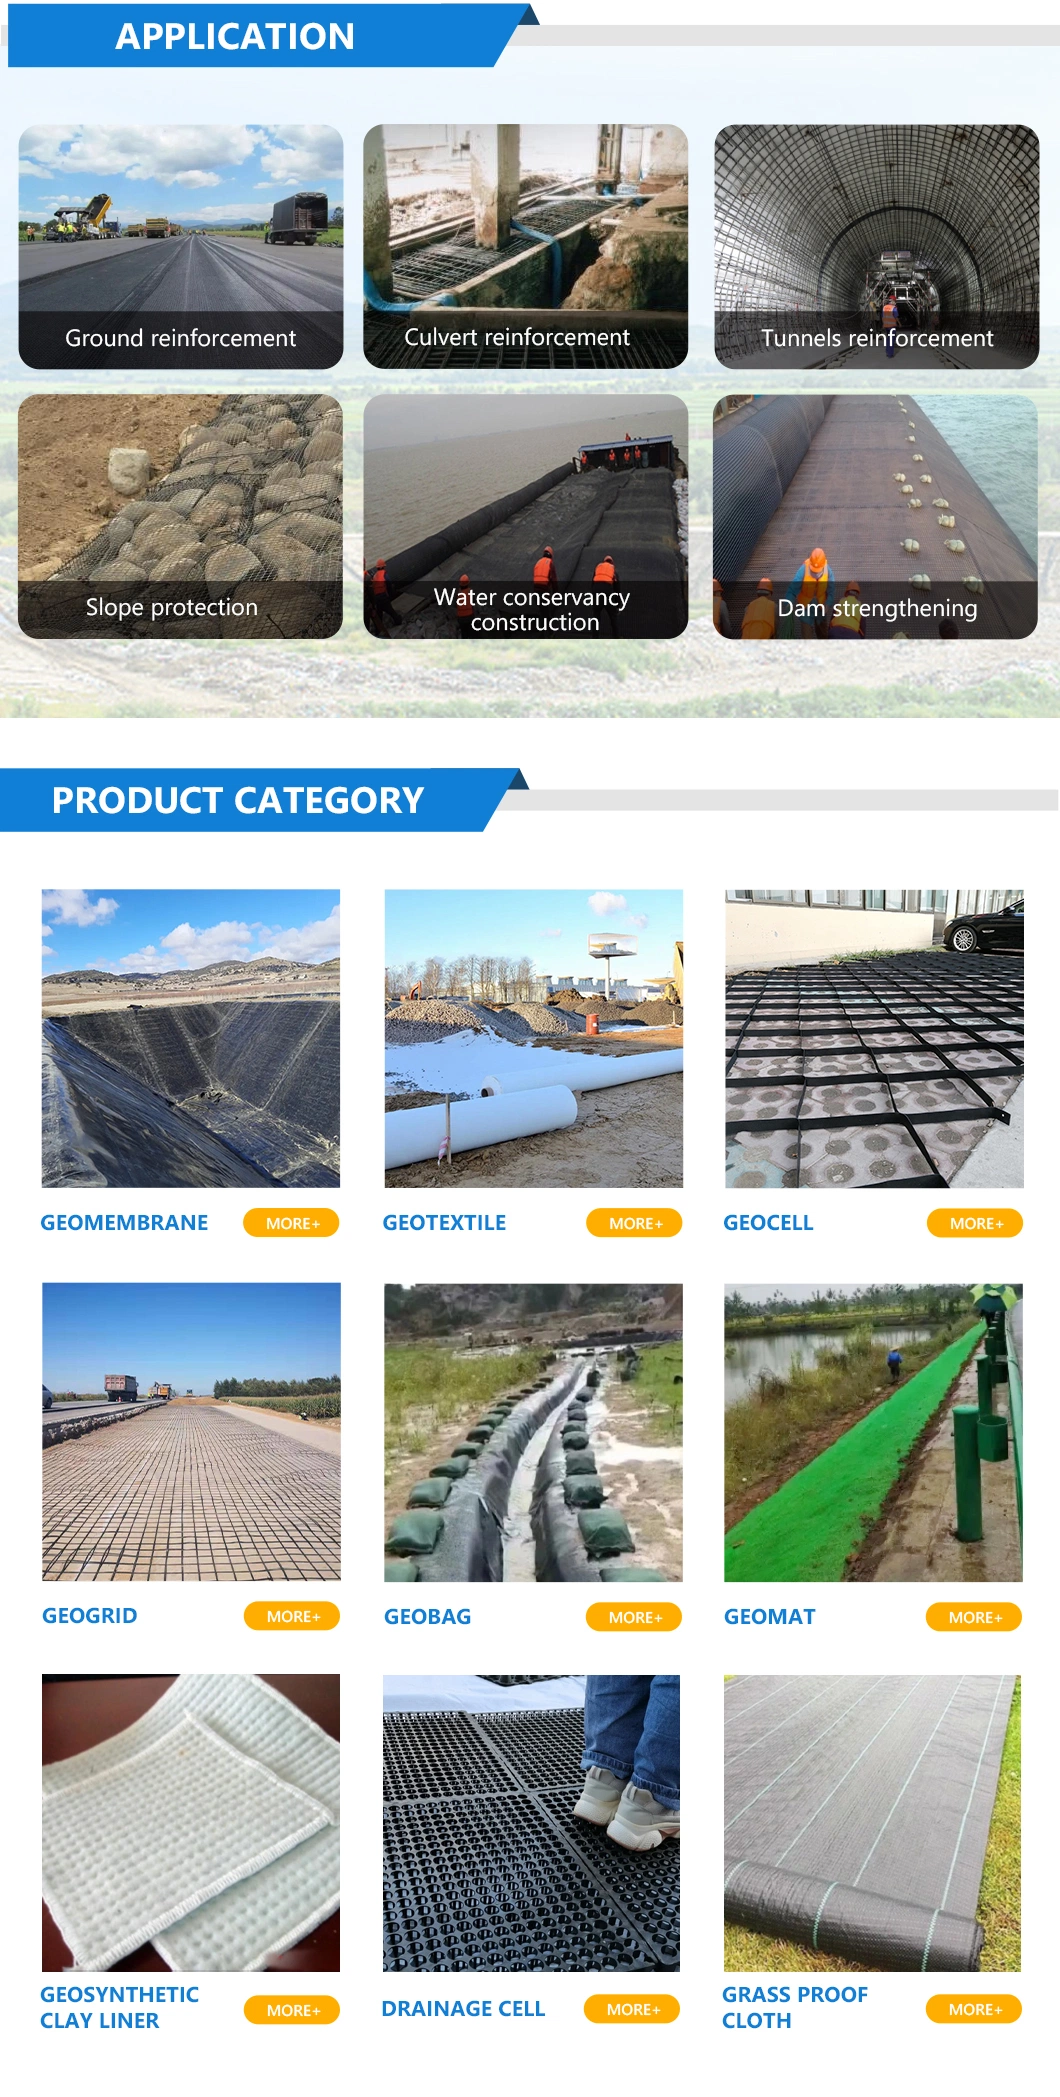 China Polyester Pet Biaxial/Uniaxial Geogrid Manufacturer for Dam and Roadbed/Slope Protection/Wall Reinforcement/Roadbed Bearing Capacity Improvement in Airfie